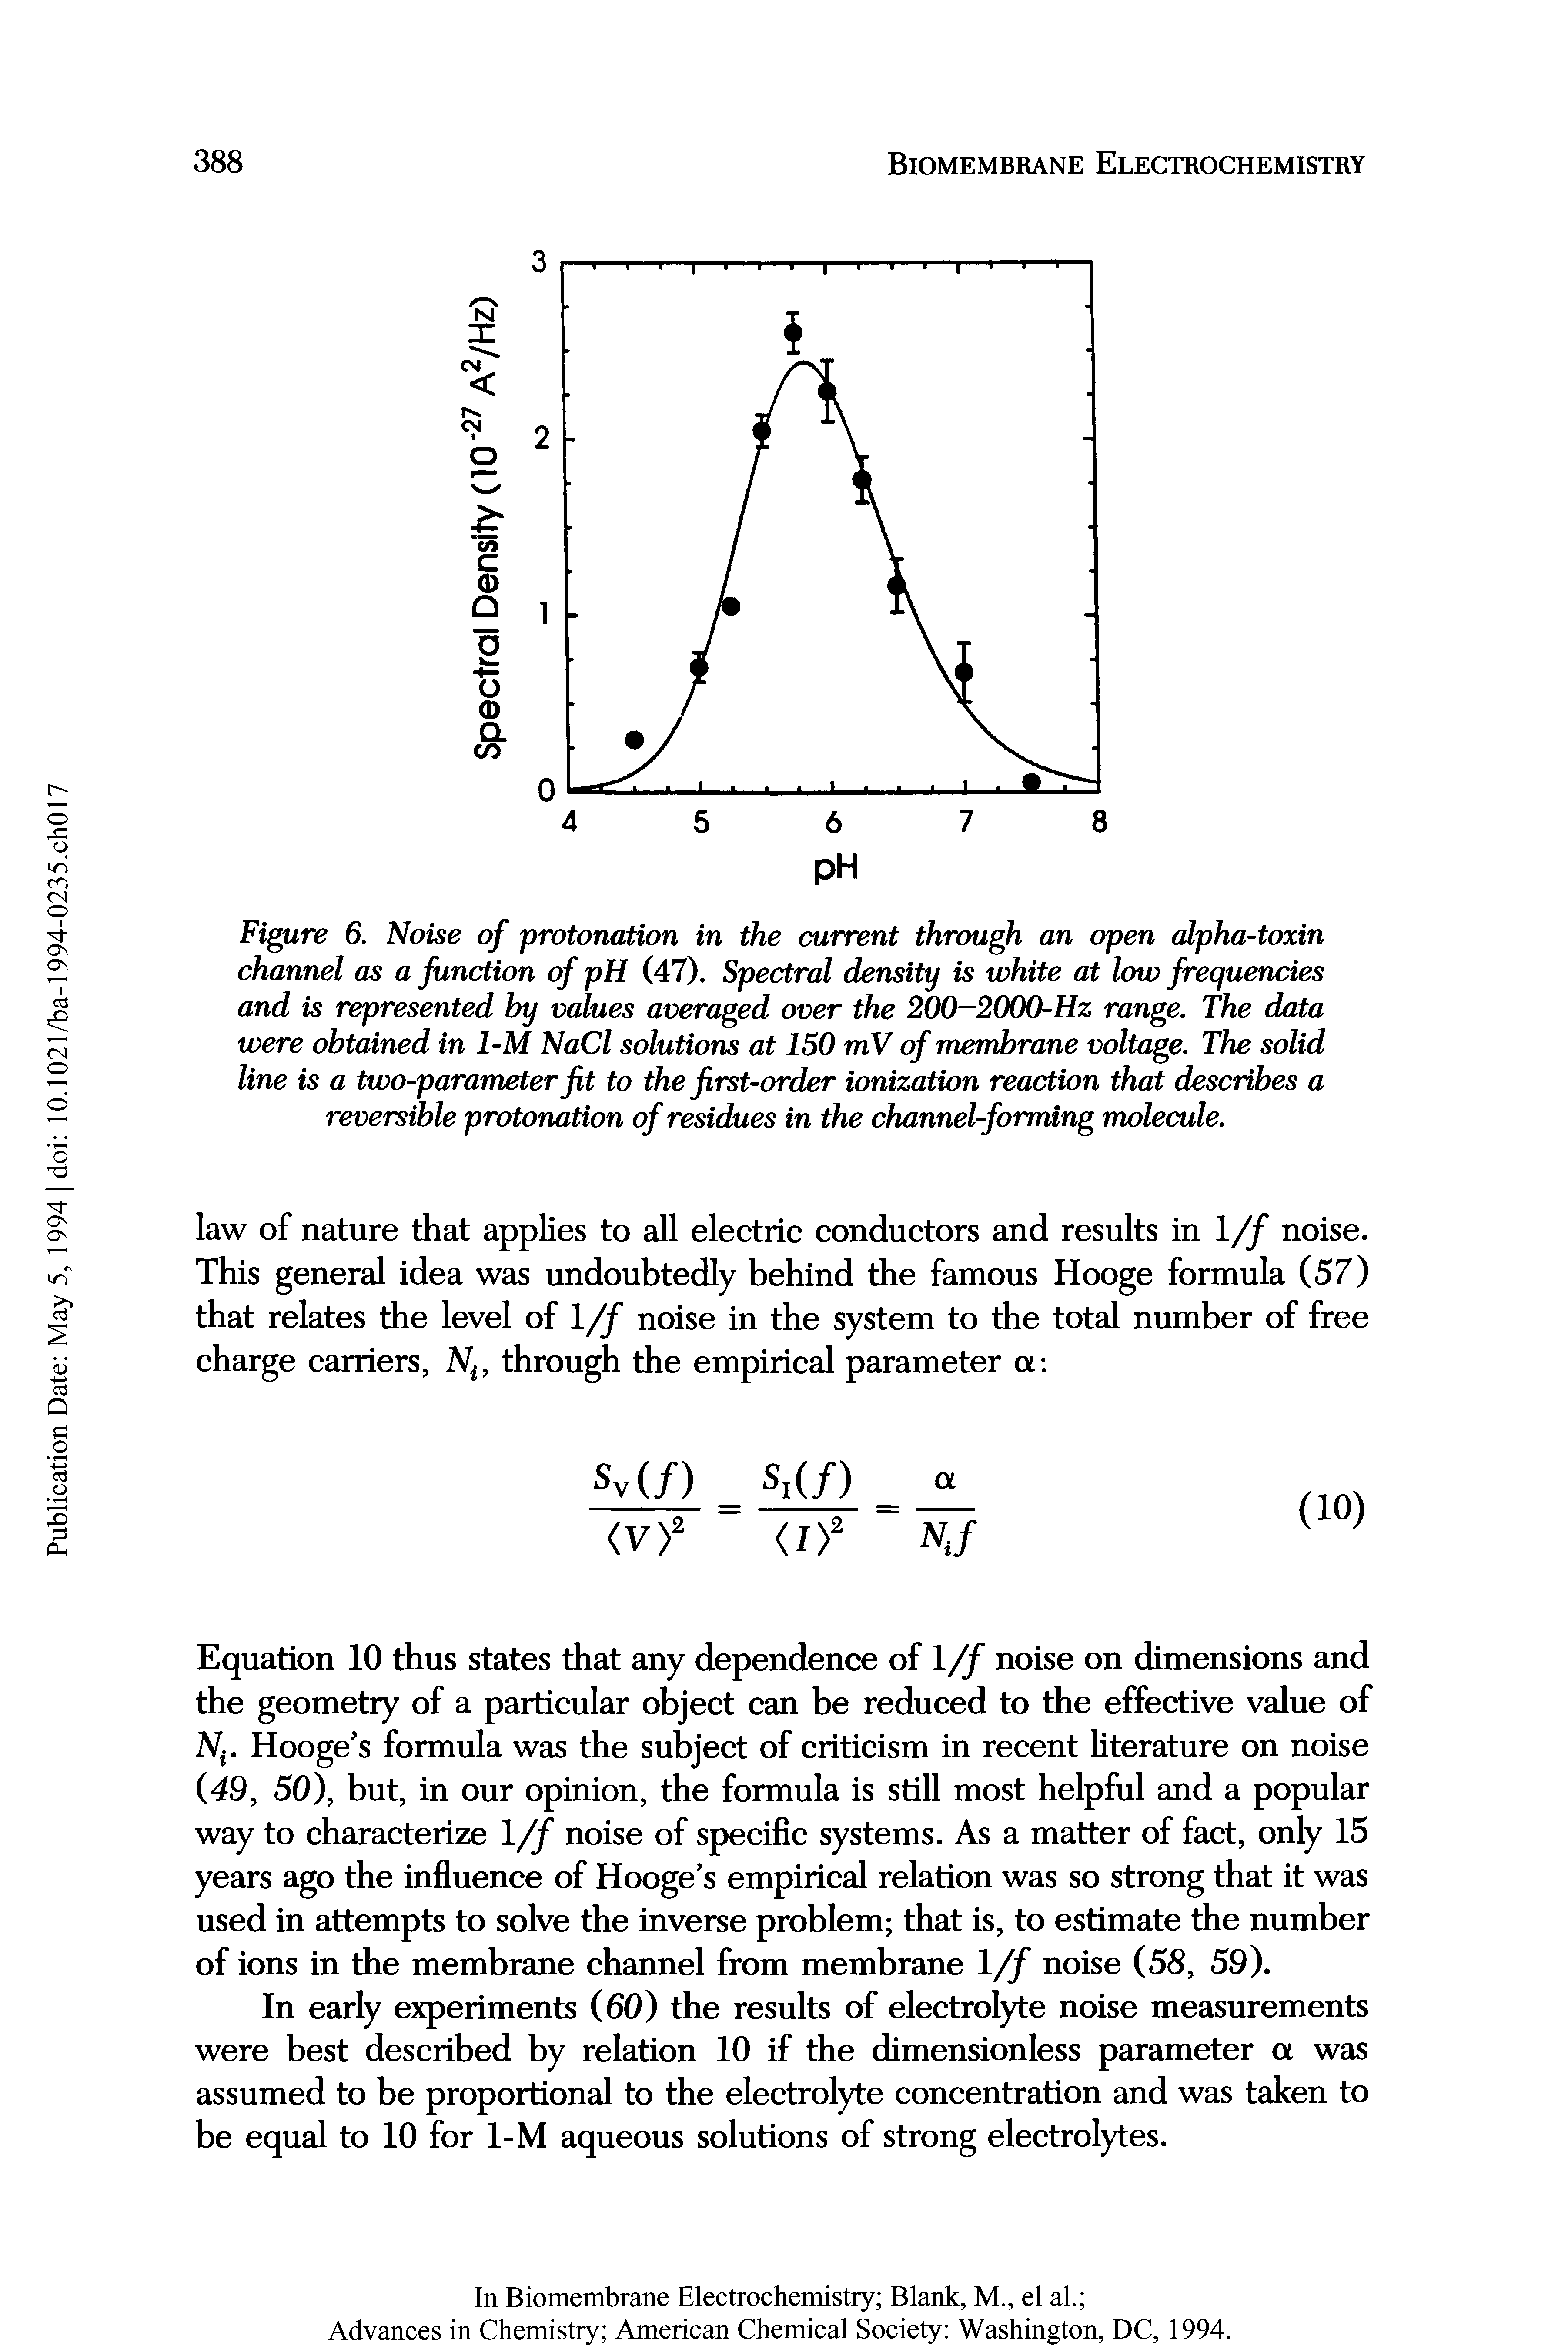 Figure 6. Noise of protonation in the current through an open alpha-toxin channel as a function of pH (47). Spectral density is white at low frequencies and is represented by values averaged over the 200-2000-Hz range. The data were obtained in 1-M NaCl solutions at 150 mV of membrane voltage. The solid line is a two-parameter fit to the first-order ionization reaction that describes a reversible protonation of residues in the channel-forming molecule.